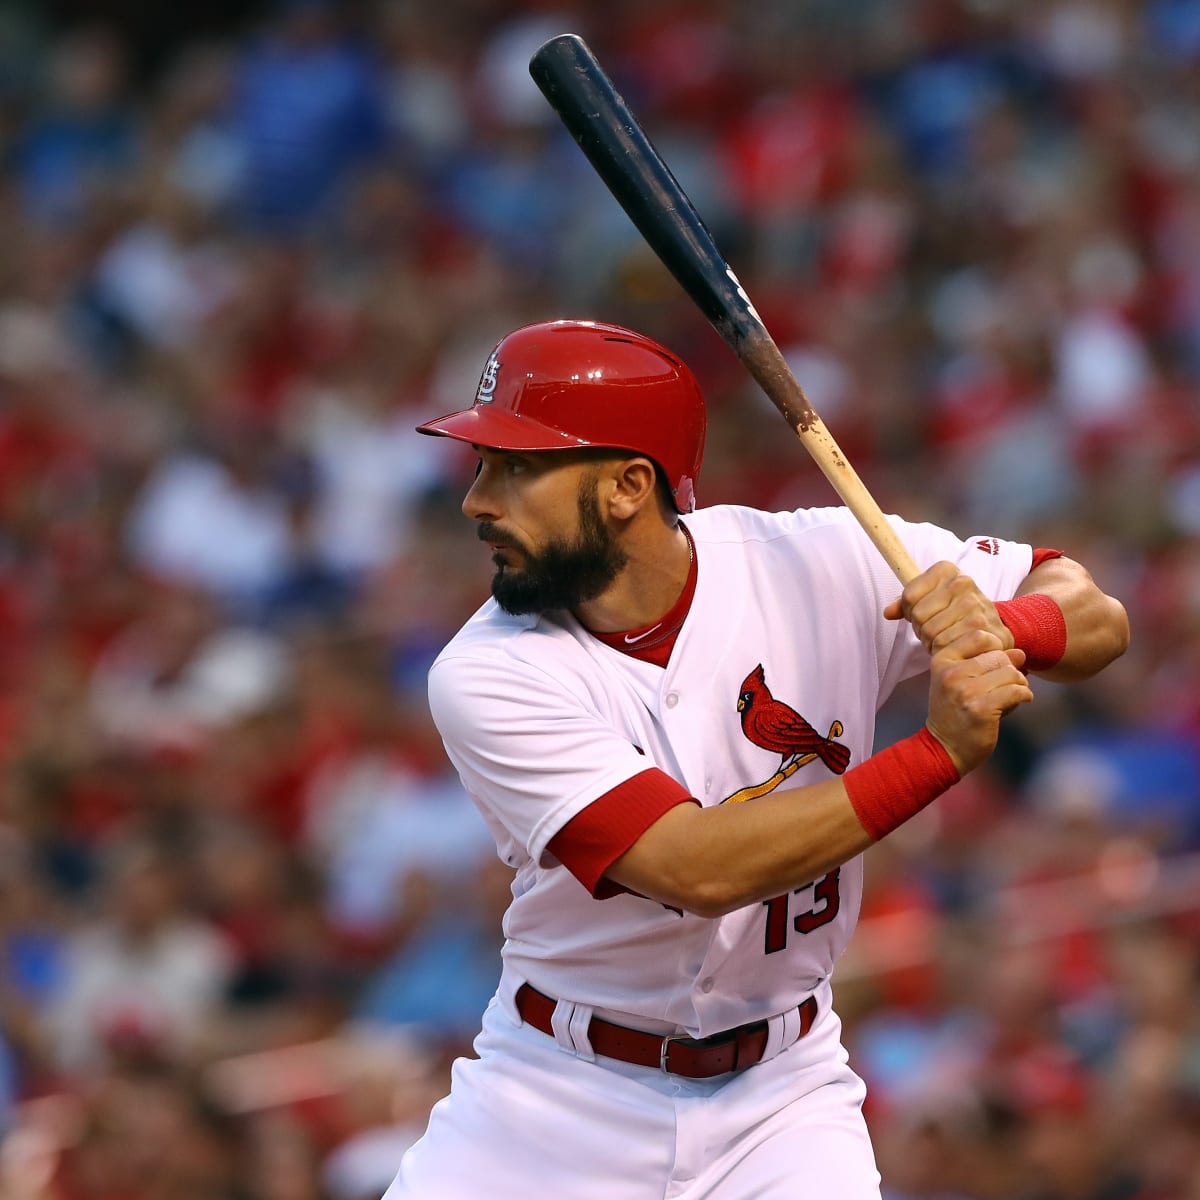 ESPN Stats & Info on X: Matt Carpenter now has 6 hits with the